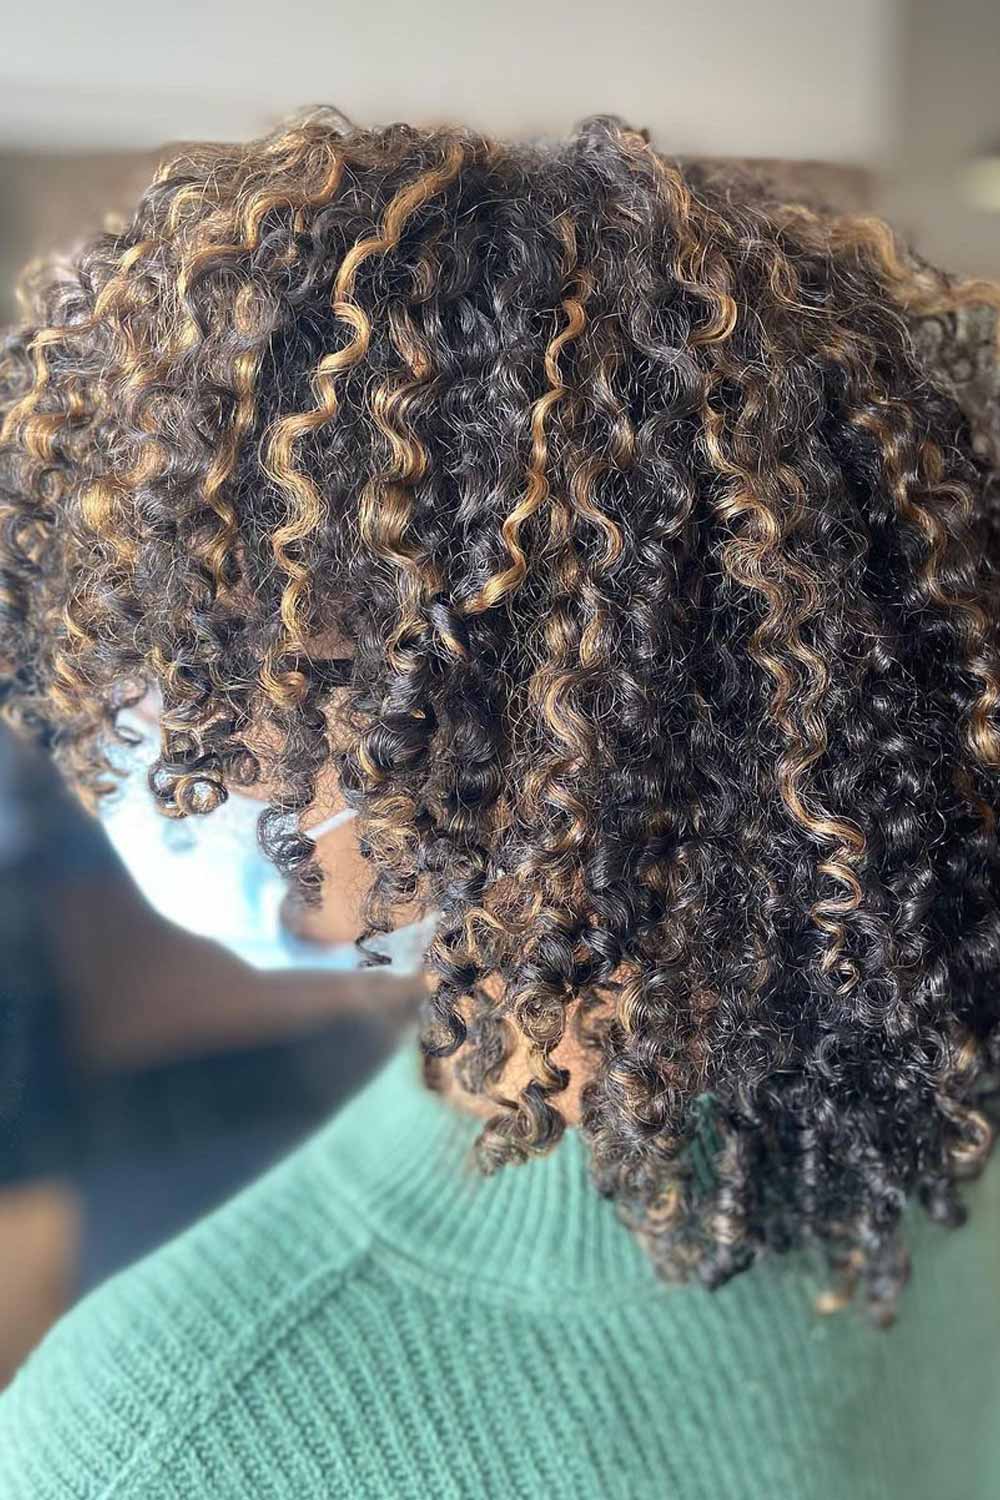 The following are some of the most popular coloring techniques and trends for curly hair in 2023, including pro tips on how to make the right choice!